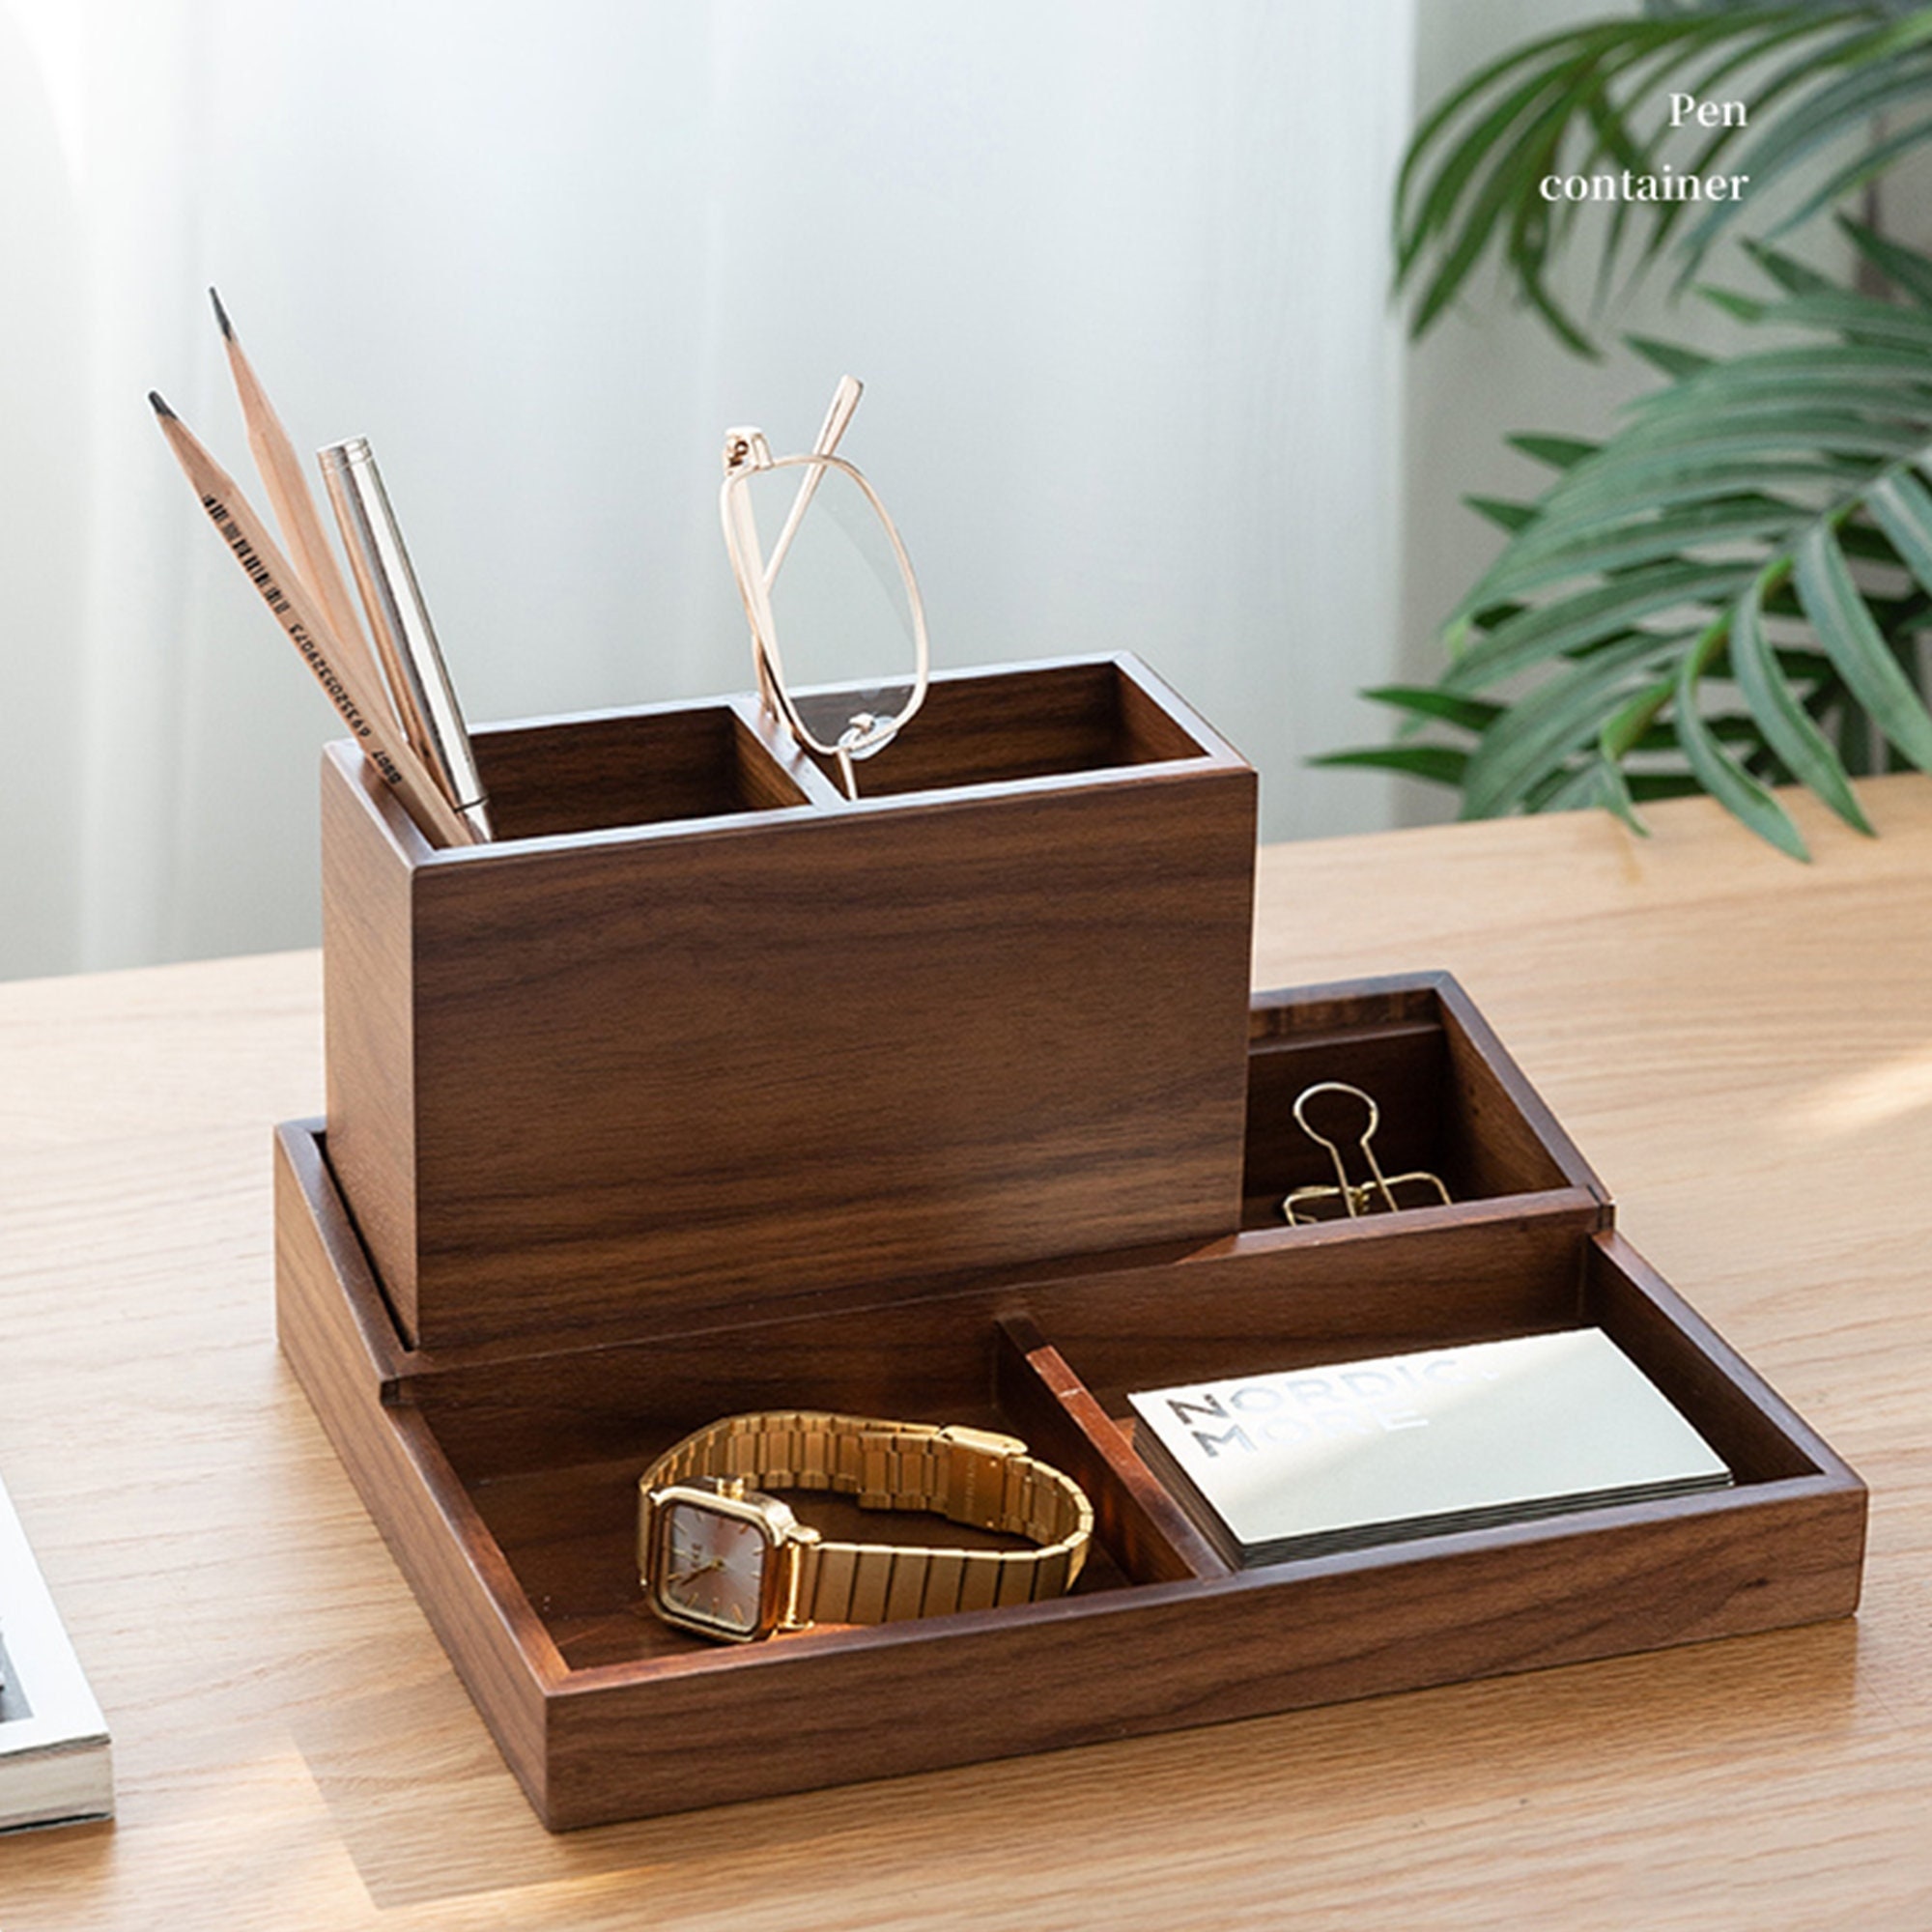 Personalized Premium Walnut Desk Organizer With Multi-compartments Storage,  Desktop Office Organizer for Stationery and Accessories -  Singapore